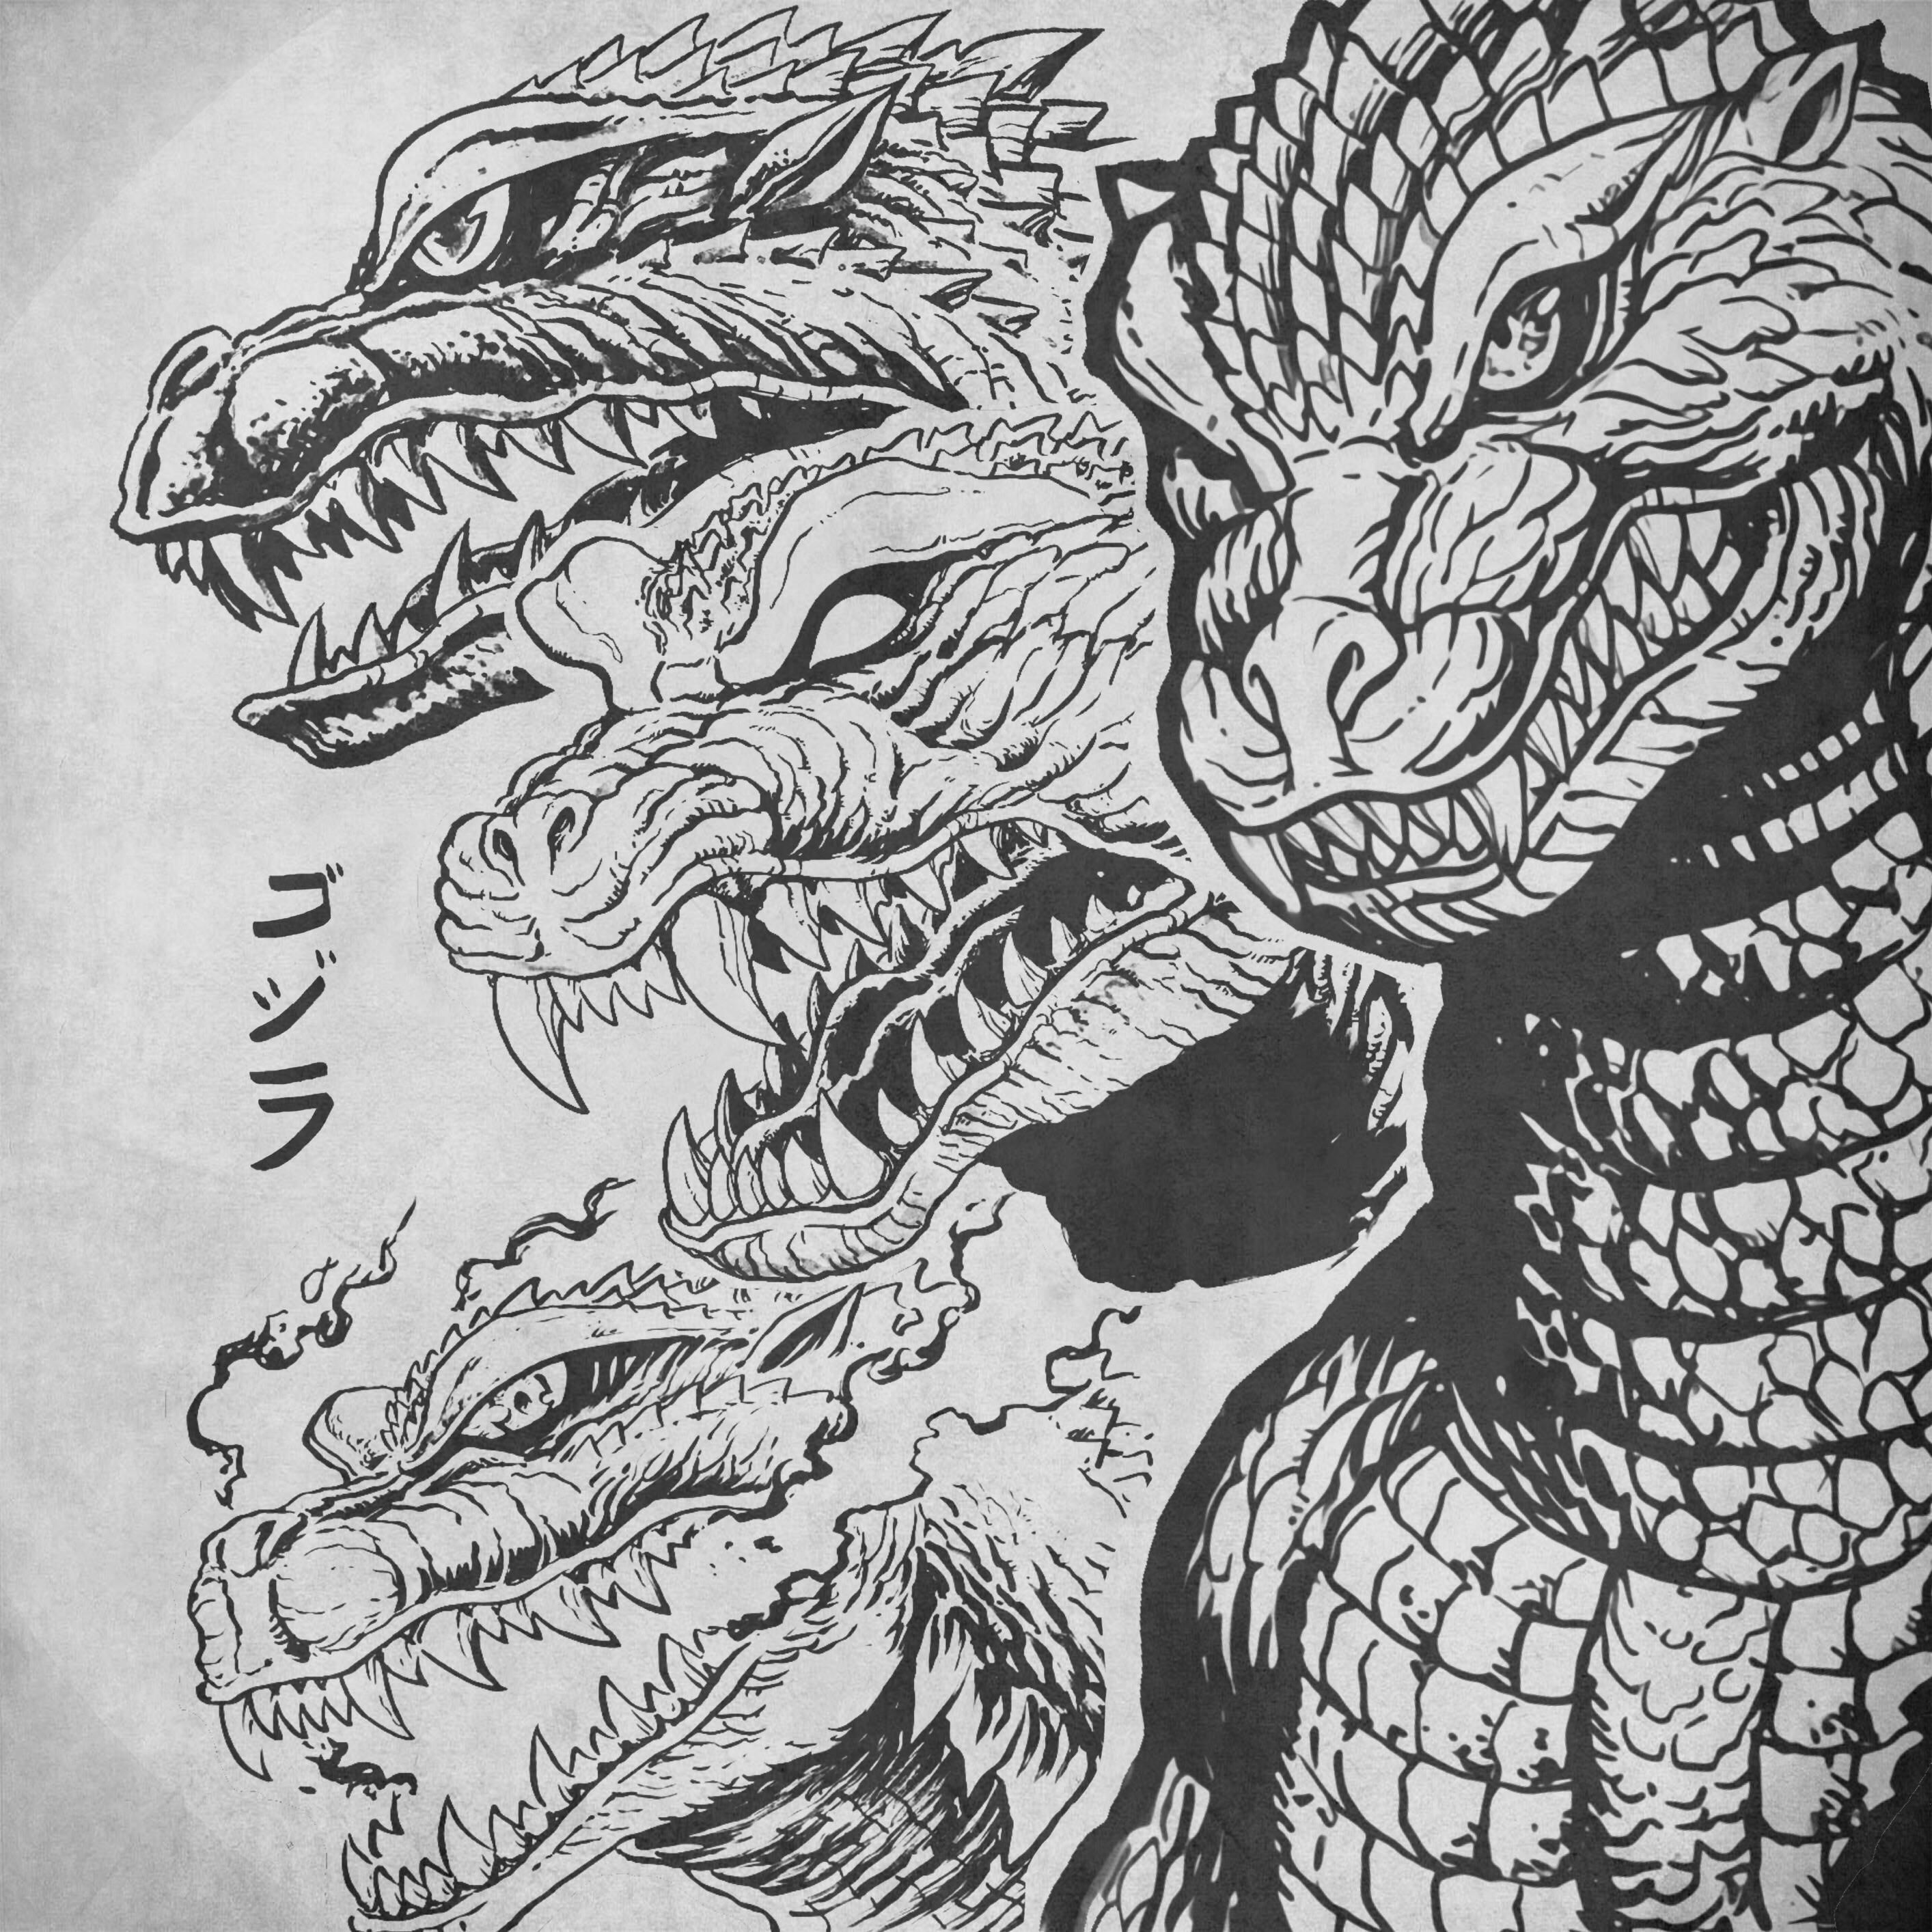 Only 2000s kids will remember this” I made out of some Matt Frank artworks saved on my phone: GODZILLA